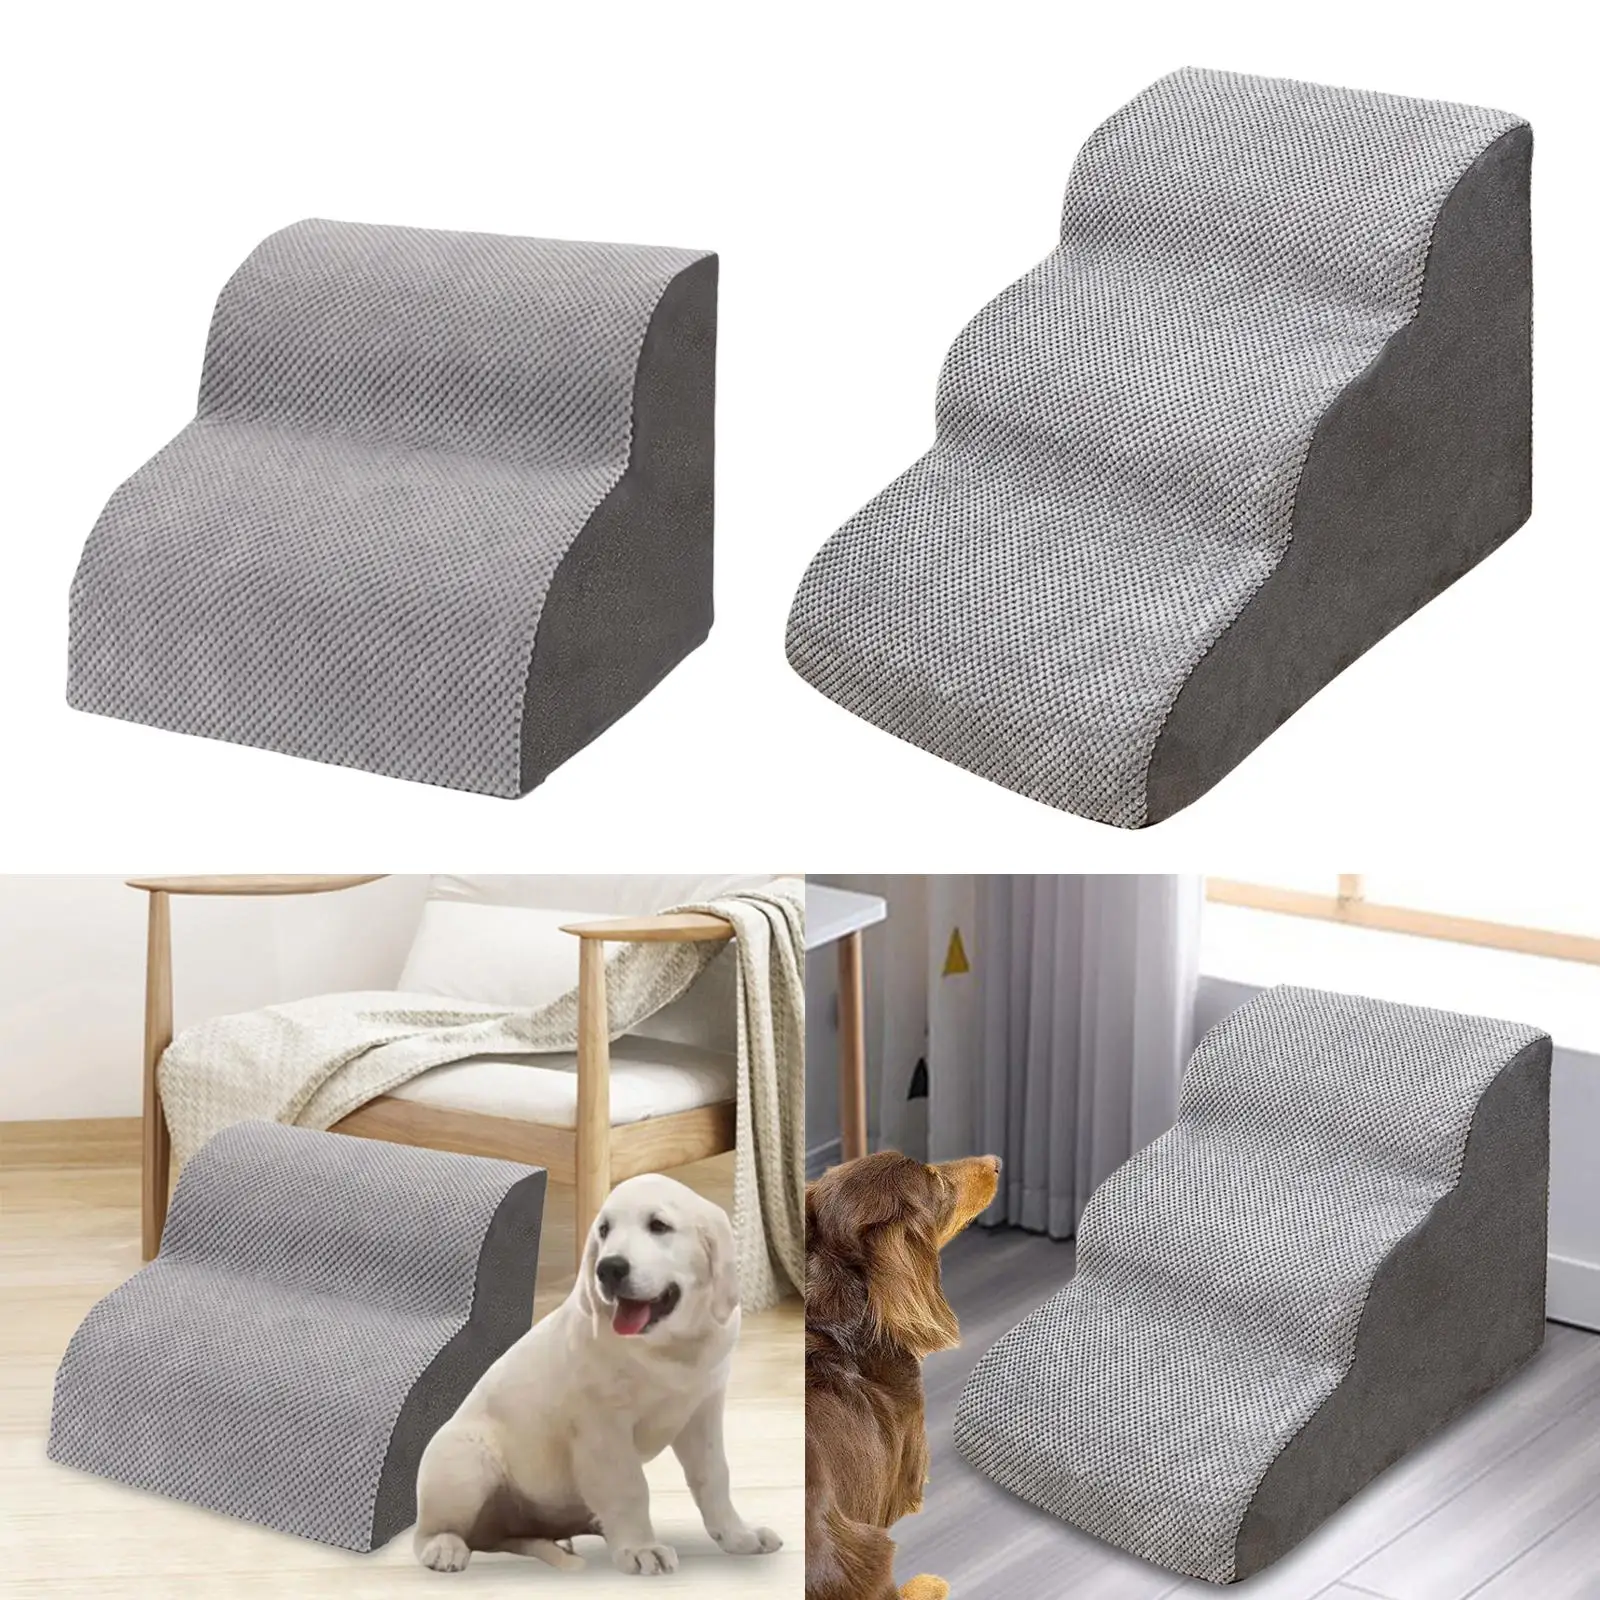 Pet Dog Stairs Ladder Durable Dog Bed Stair Detachable Washable Cover Pet Ramp for High Bed Indoor Cats Couch Home Older Dogs